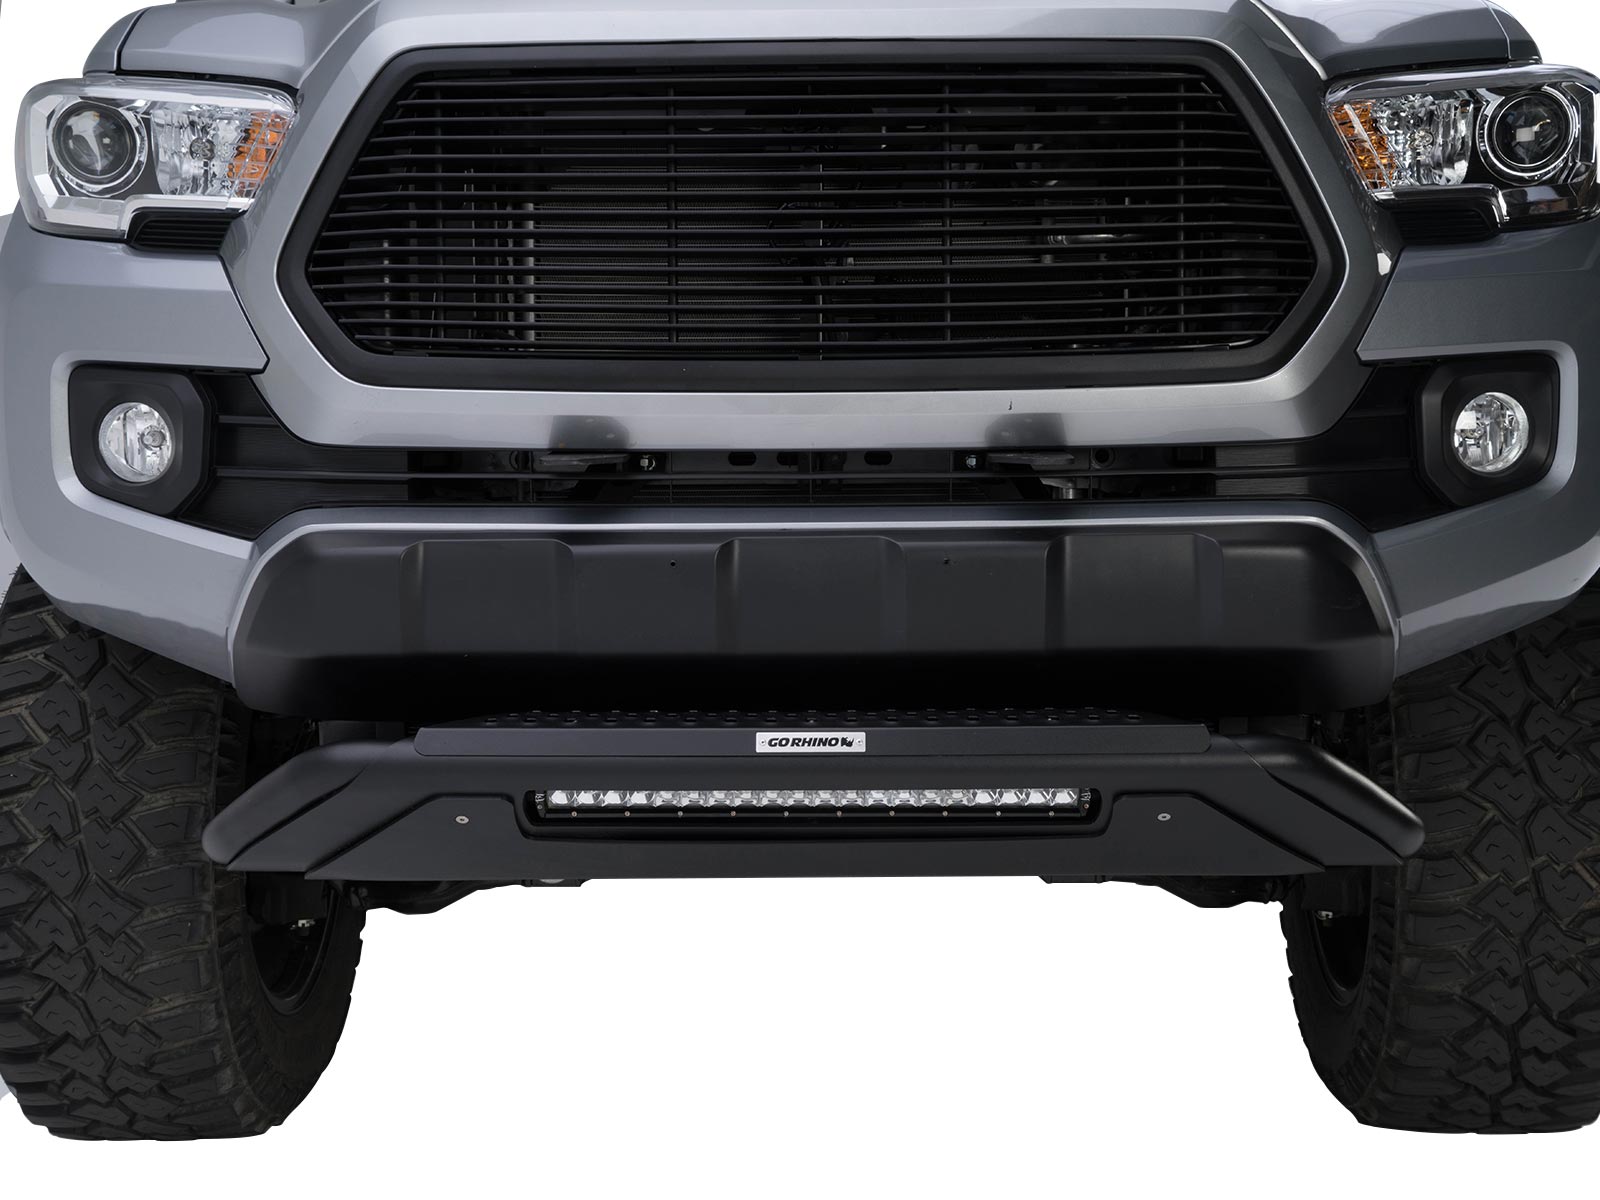 SUPER DRIVE D02G0435 for 2015-2018 Chevy Colorado Stainless Steel Bull Bar Grill Guard Bumper with Skid Plate and Optional Light Holes 